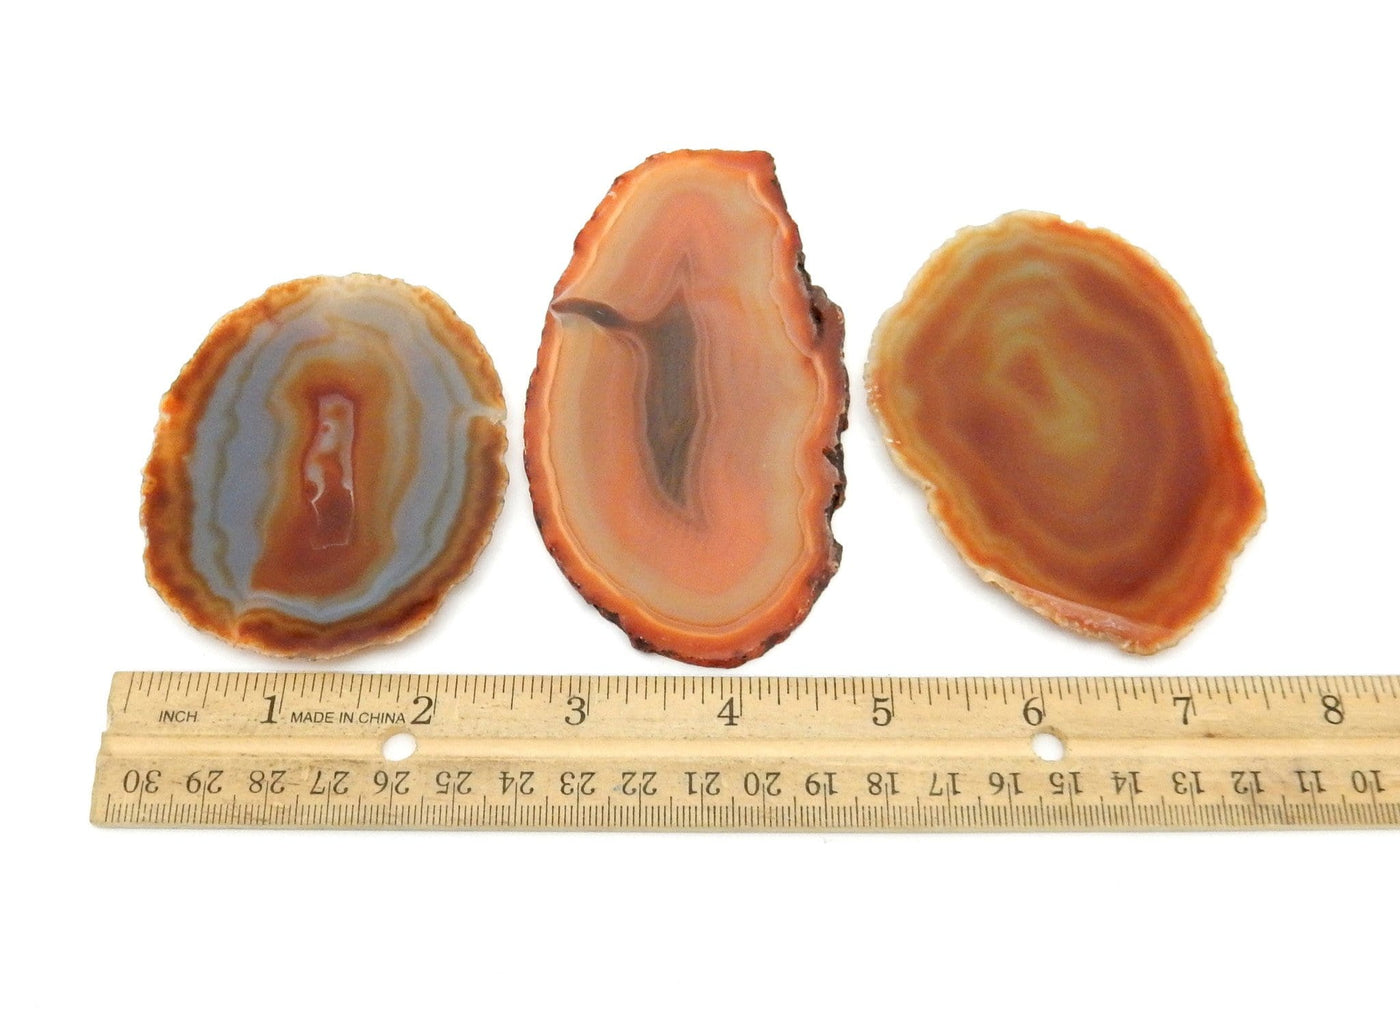 3 Red Agate Slices next to ruler for size reference